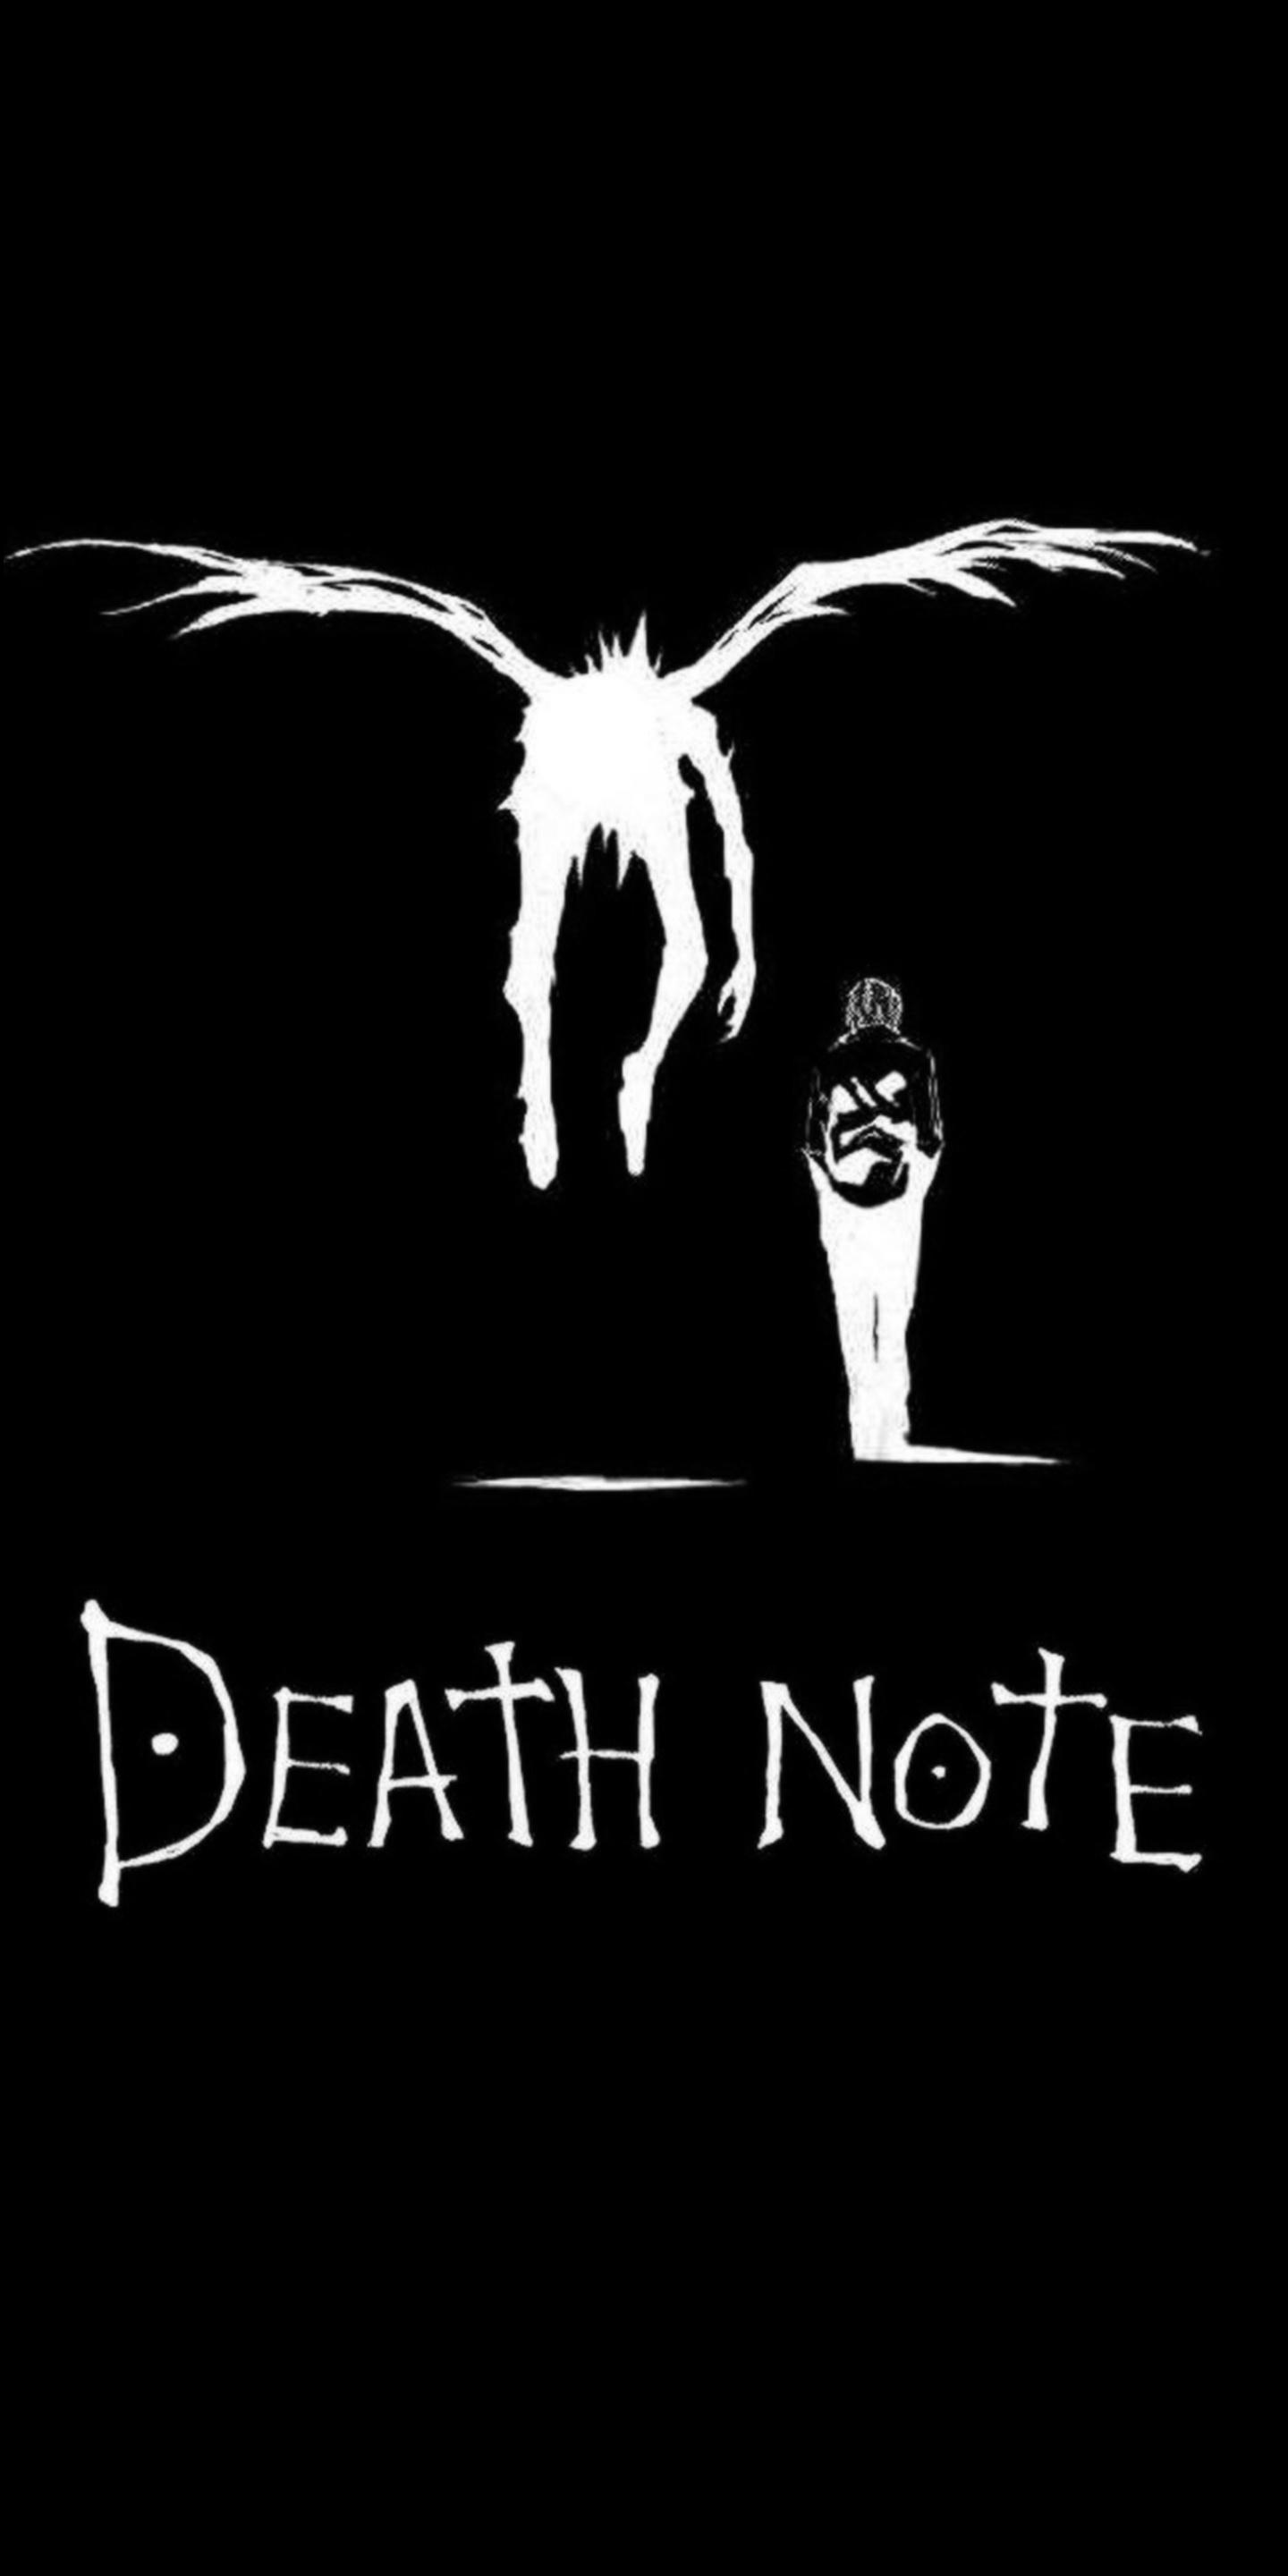 Death Note Wallpaper Hd 4k For Android Apk Download